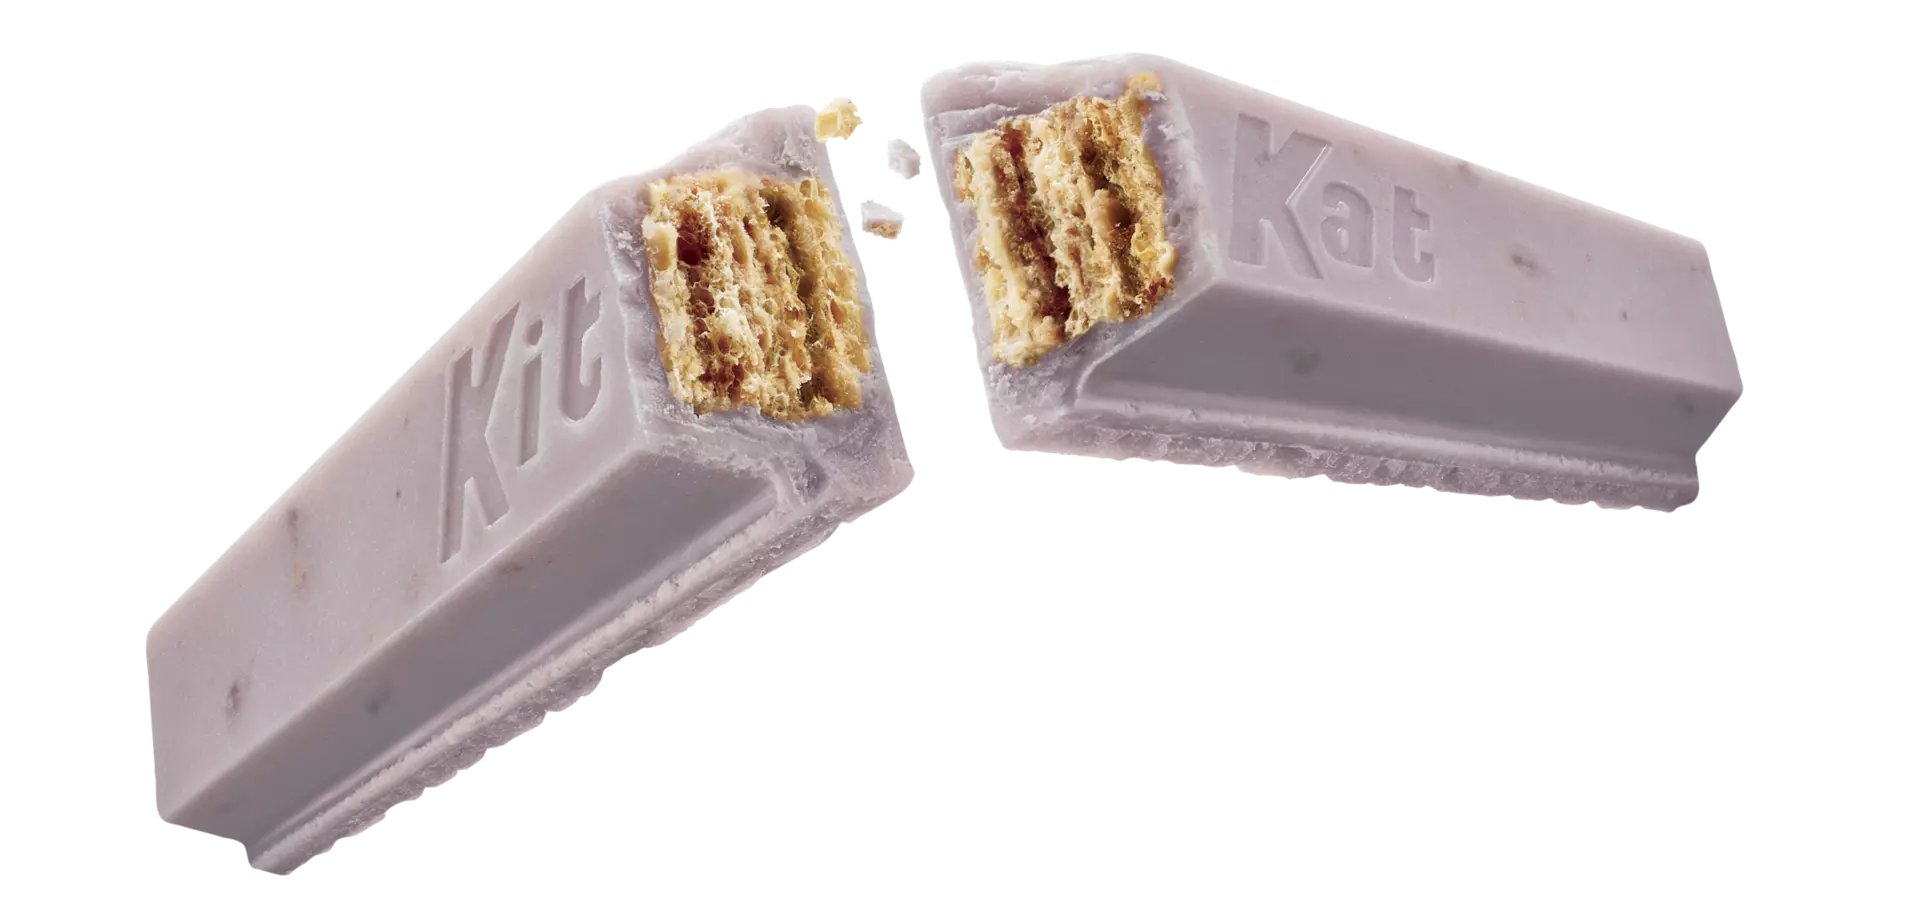 KIT KAT® Blueberry Muffin King Size Candy Bar, 3 oz - Out of Package